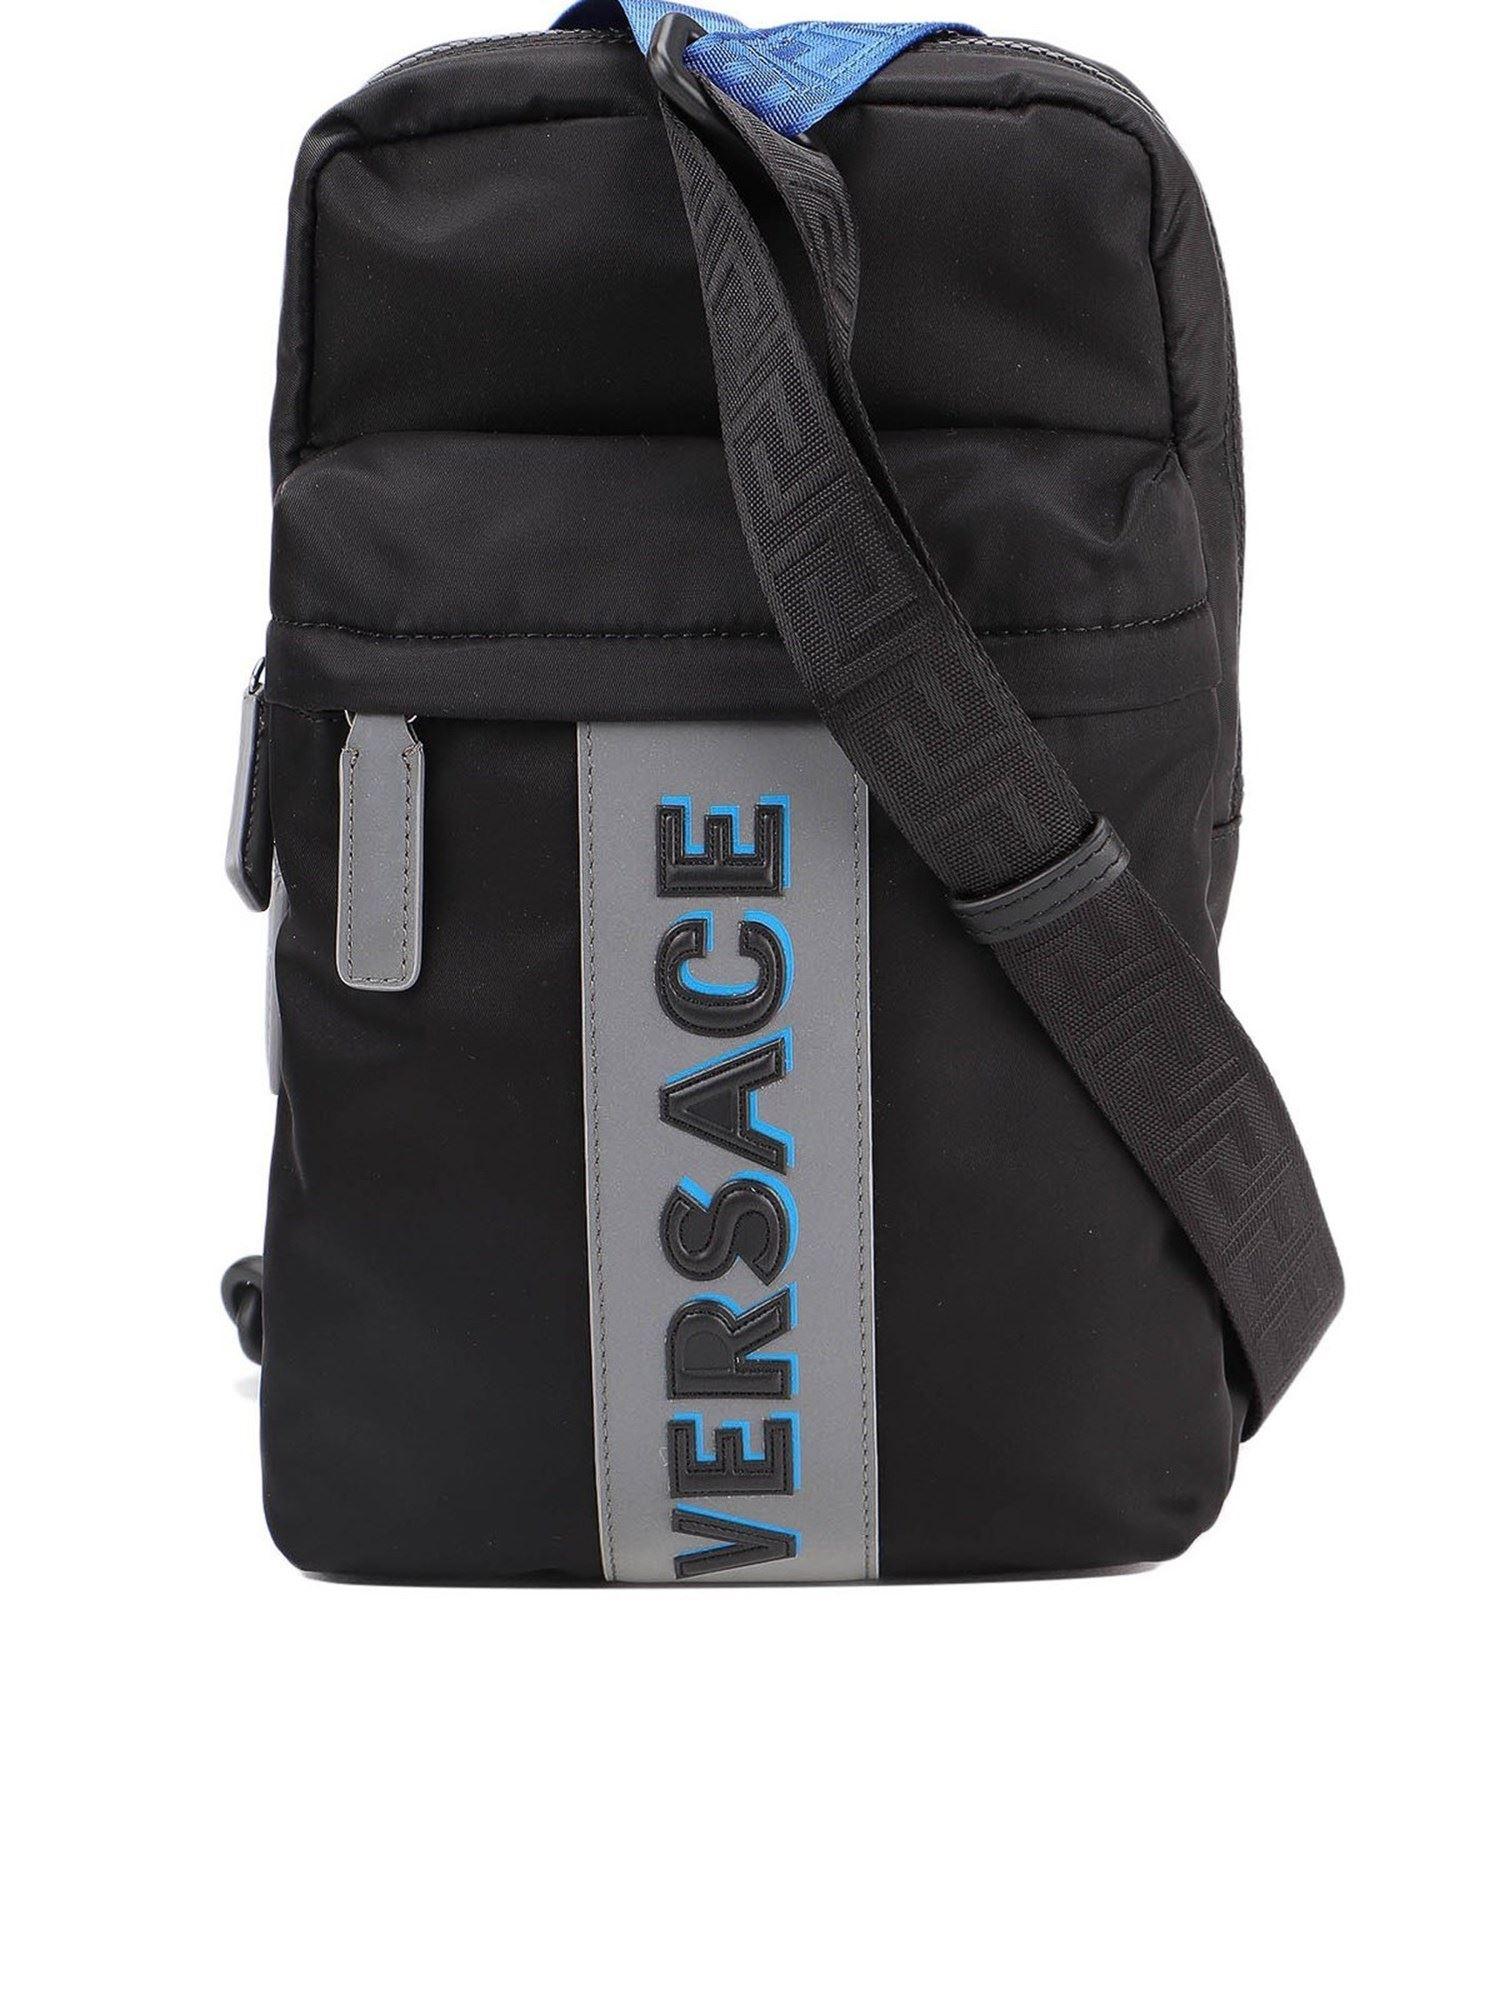 Versace Synthetic One-shoulder Nylon Backpack in Black for Men - Lyst